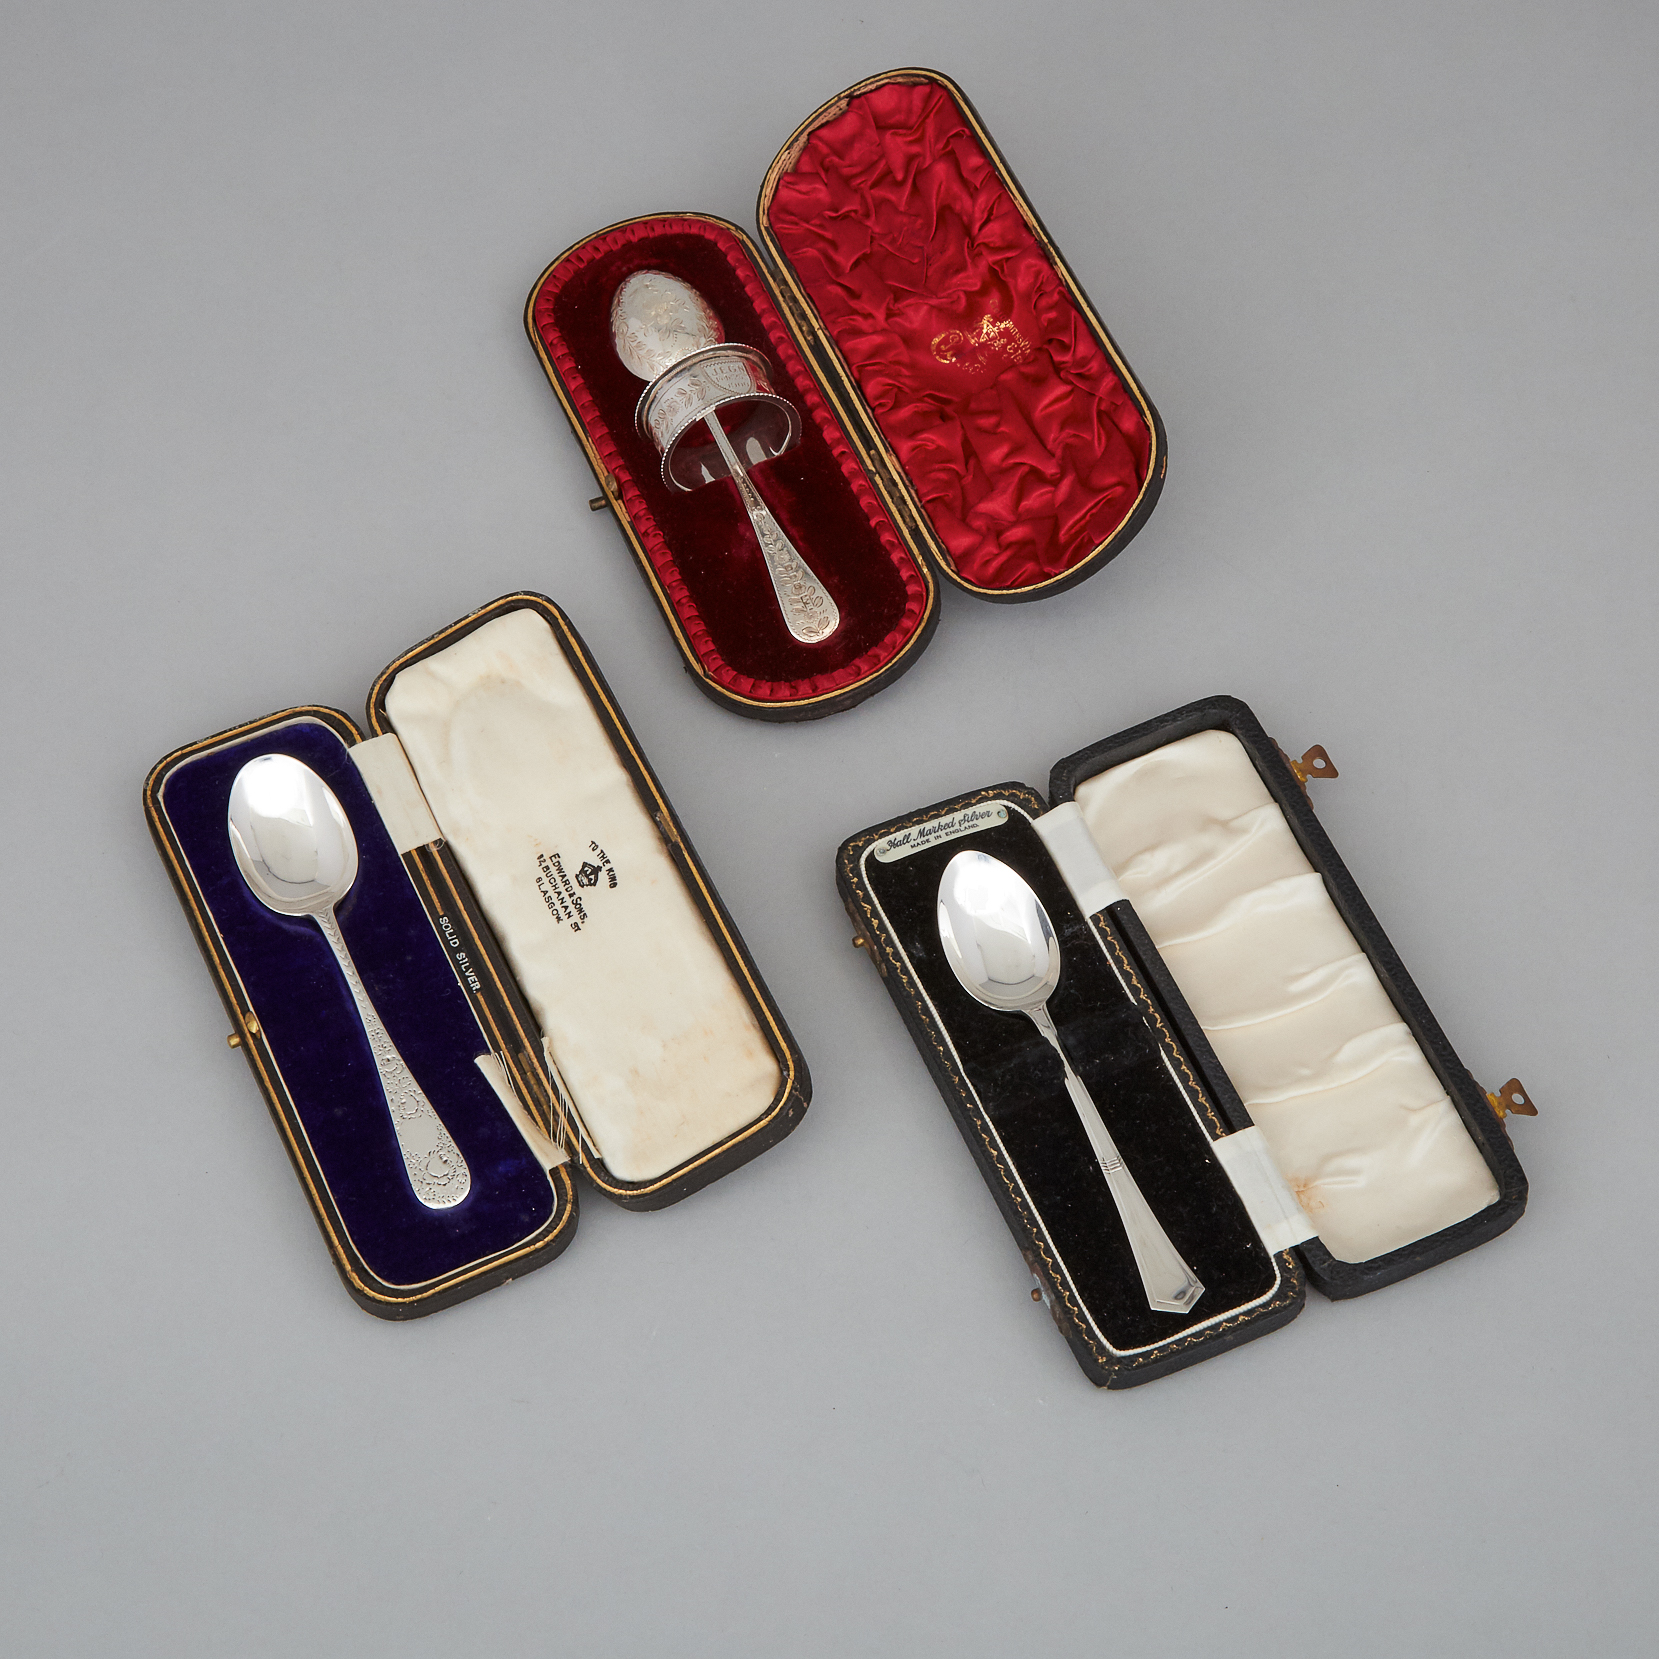 Three English Silver Spoons and a Napkin Ring, Birmingham and Sheffield, 1898-1958